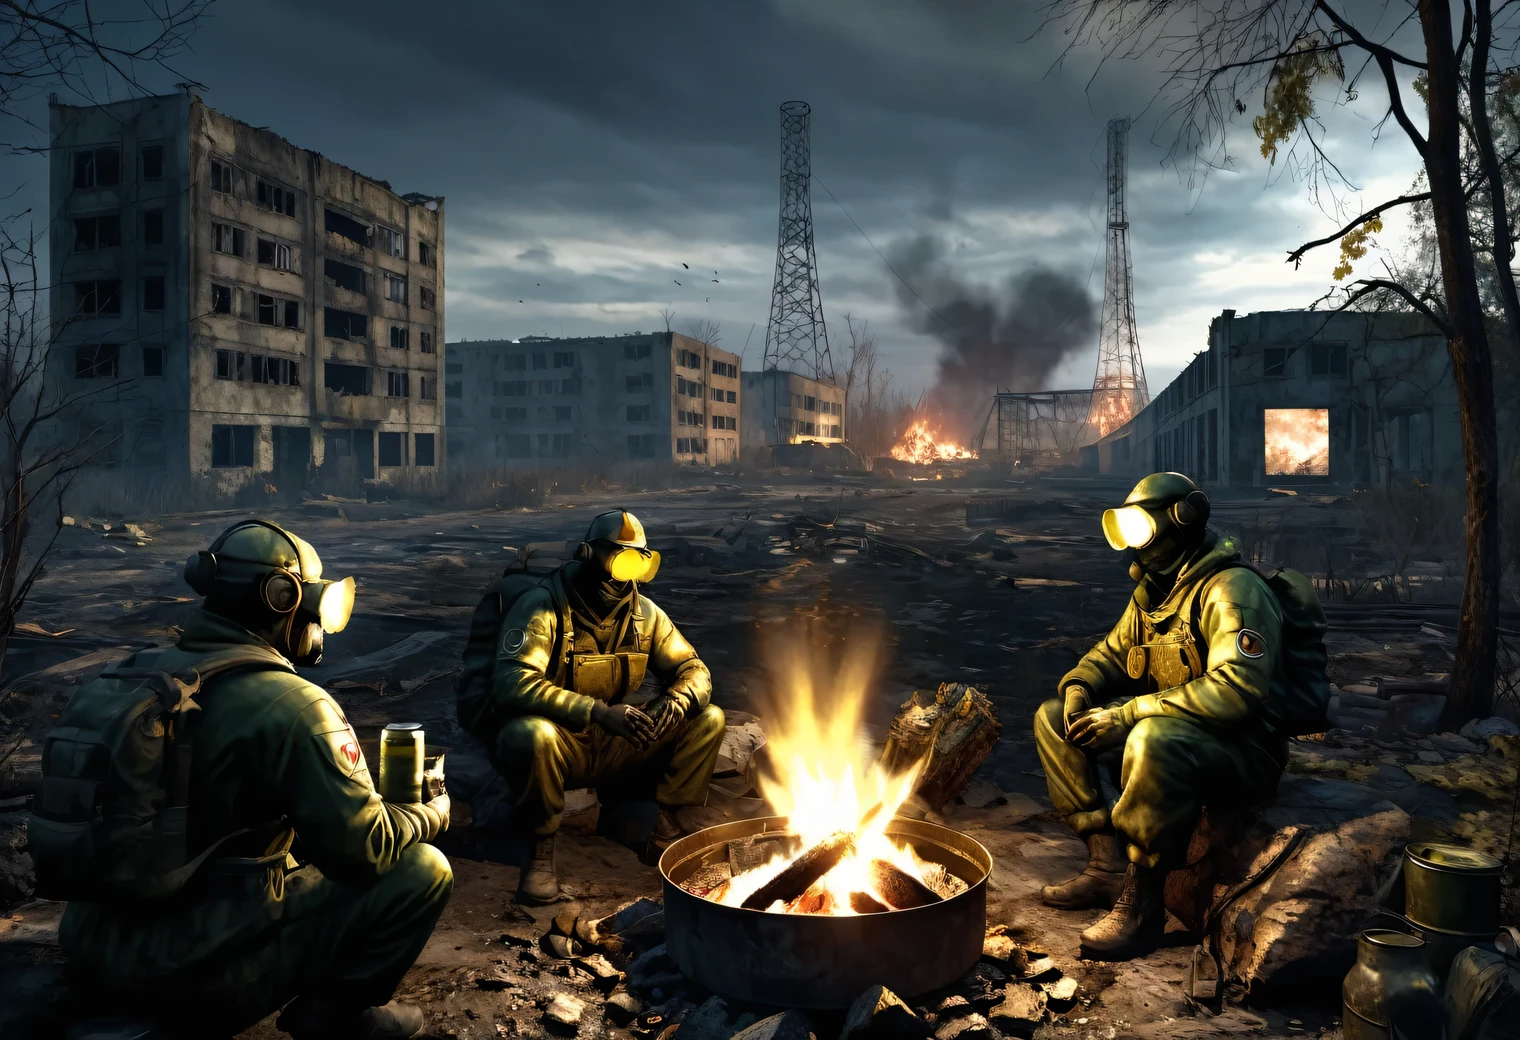 The theme is based on the game Stalker Shadow of Chernobyl, a realistic image in the style of a high-resolution computer video game, the surroundings of the city of Pripyat destroyed by disaster and time, the Chernobyl nuclear power plant is visible in the distance, dangerous anomalies with dark destructive energy and lightning are visible around, clusters of anomalies sparkle and shine, in the foreground 4 stalkers are sitting around a campfire and eating among the ruins canned food, stalkers in camouflage and stalker gear, glowing artifacts and unique objects are visible near the ruins, S.T.A.L.K.E.R. project, 32k resolution, cinematographic processing, high texture smoothing,